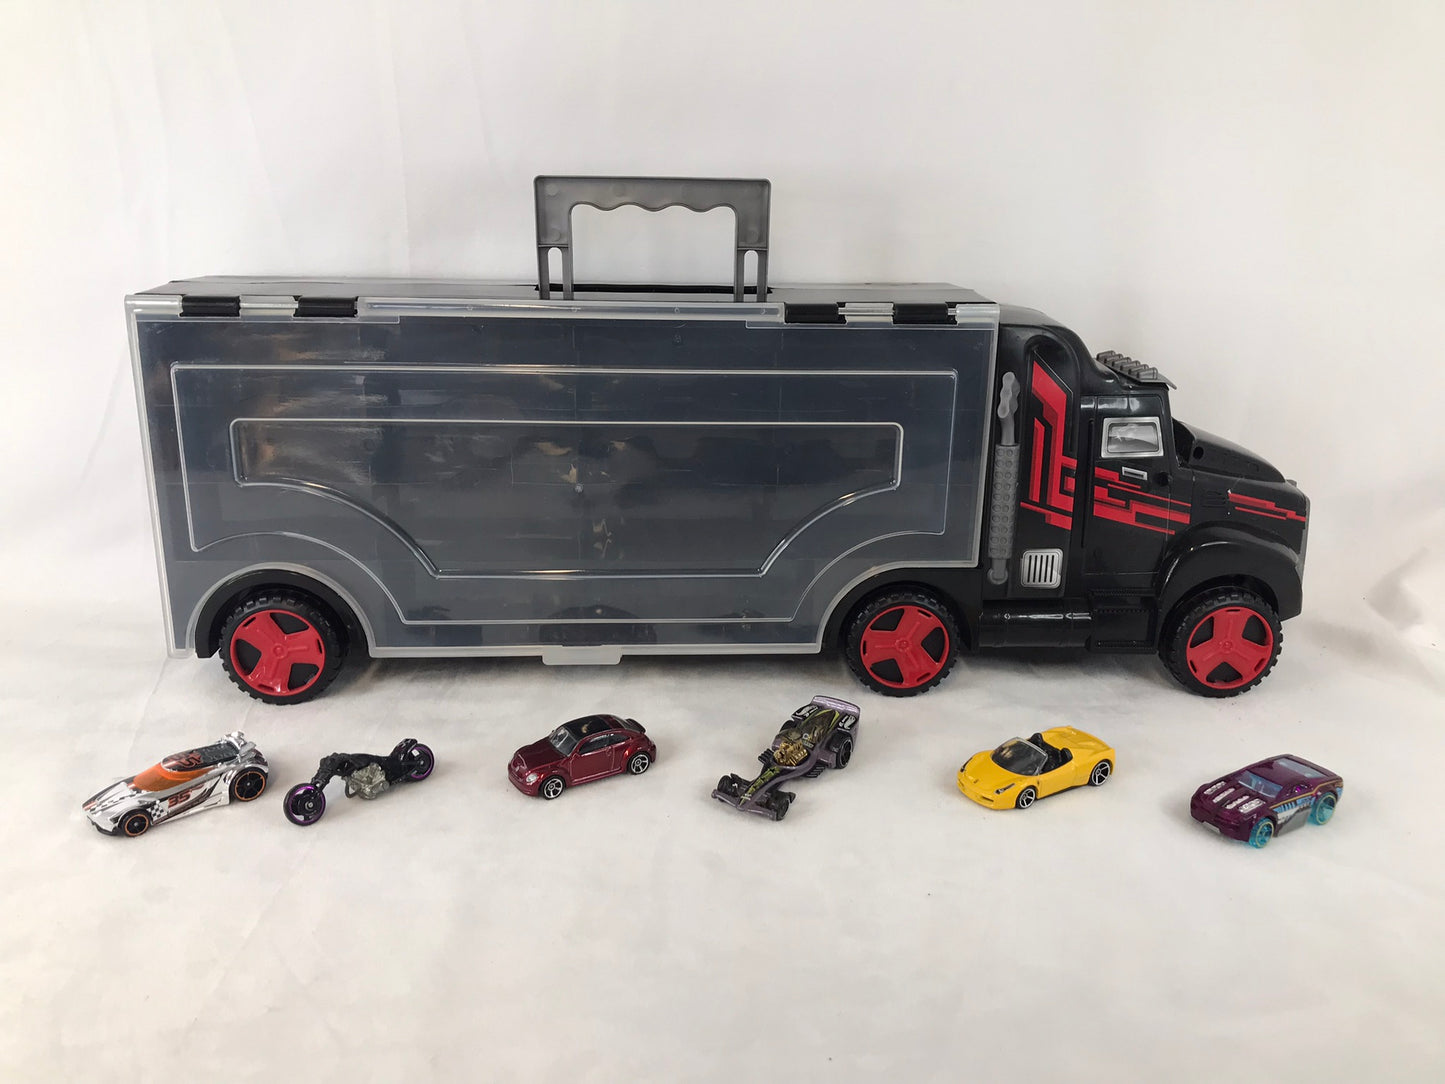 Hot Wheels and Die Cast Cars With Large Car Carrier Truck